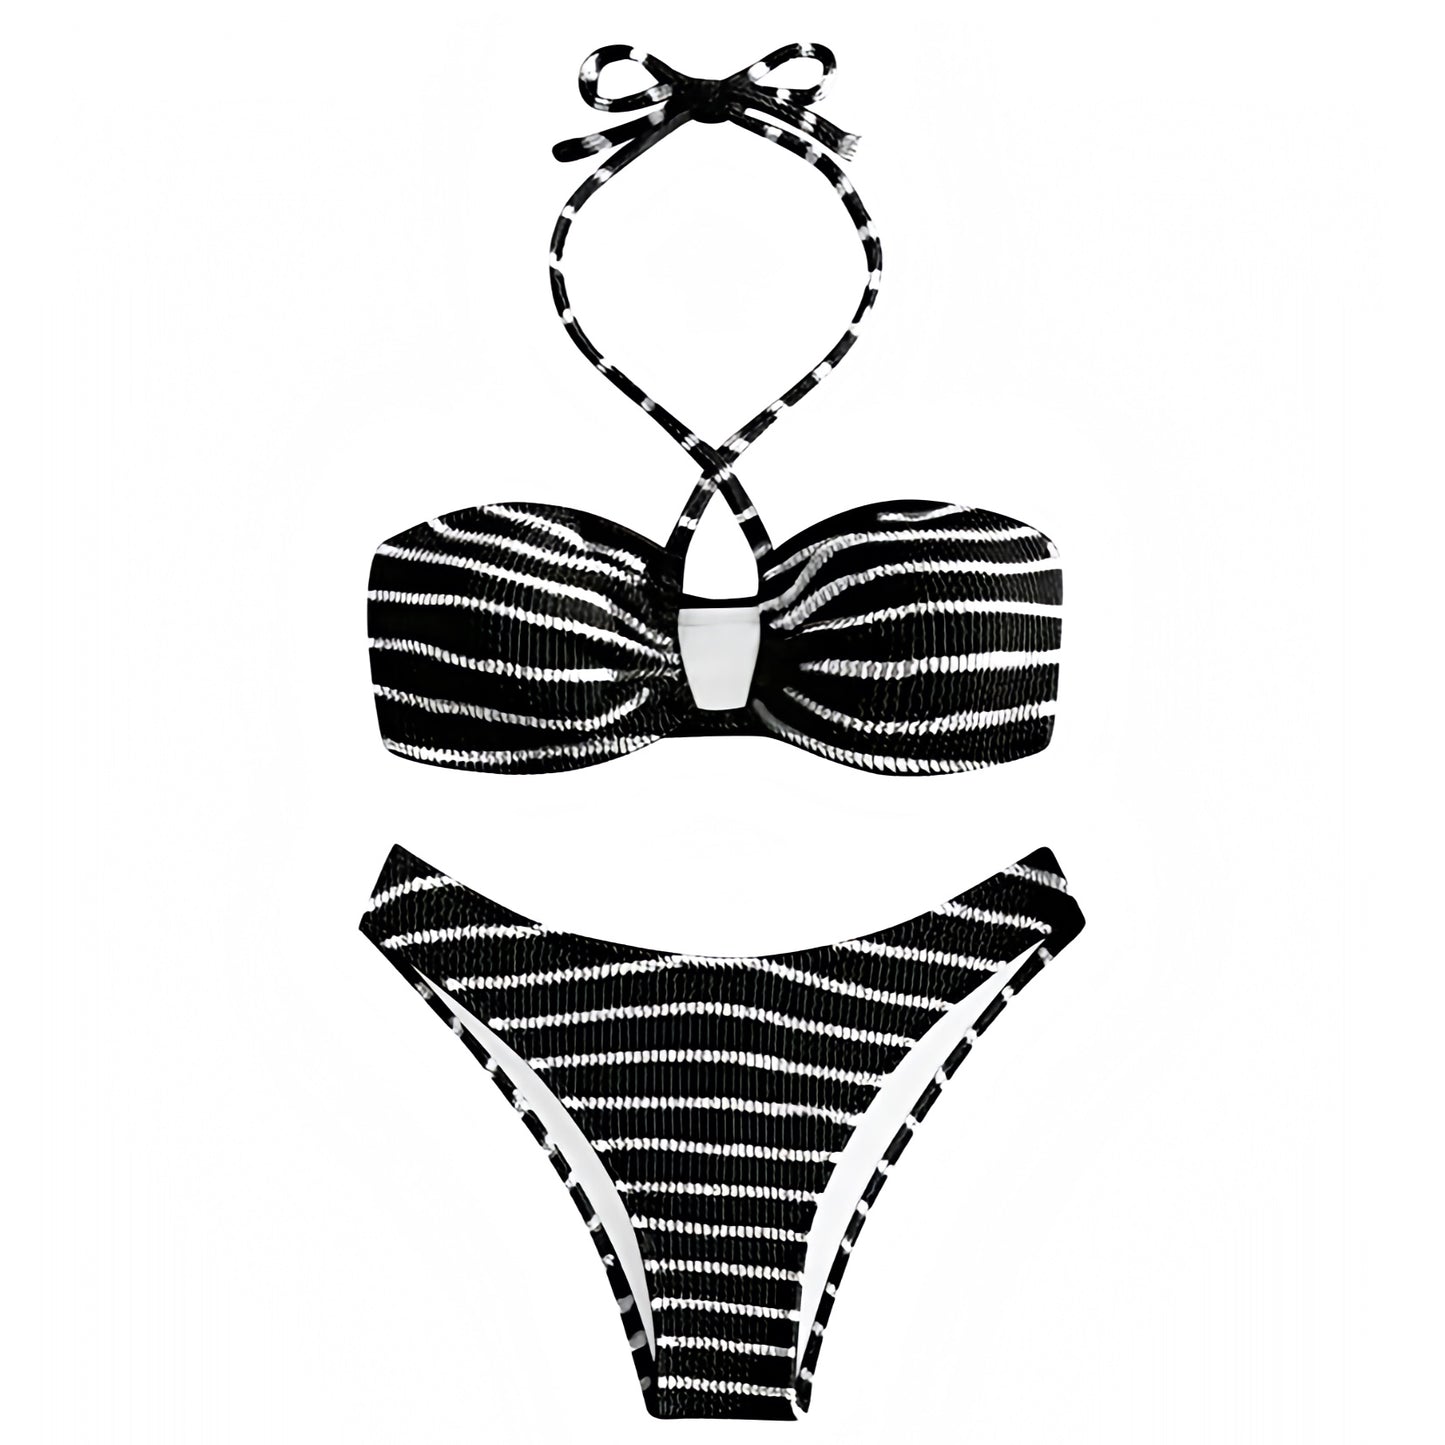 black-and-white-striped-pinstriped-ribbed-shirred-knit-crochet-cut-out-bandeau-spaghetti-strap-halter-sweetheart-neckline-sleeveless-wireless-push-up-cheeky-thong-2-piece-bikini-set-swimsuit-top-bottoms-swimwear-bathing-suit-women-ladies-teens-tweens-chic-trendy-spring-2024-summer-elegant-classy-feminine-preppy-style-girlie-cute-european-vacation-beach-wear-blackbough-frankies-kulakinis-revolve-same-oneone-mango-pacsun-urban-outfitters-dupe